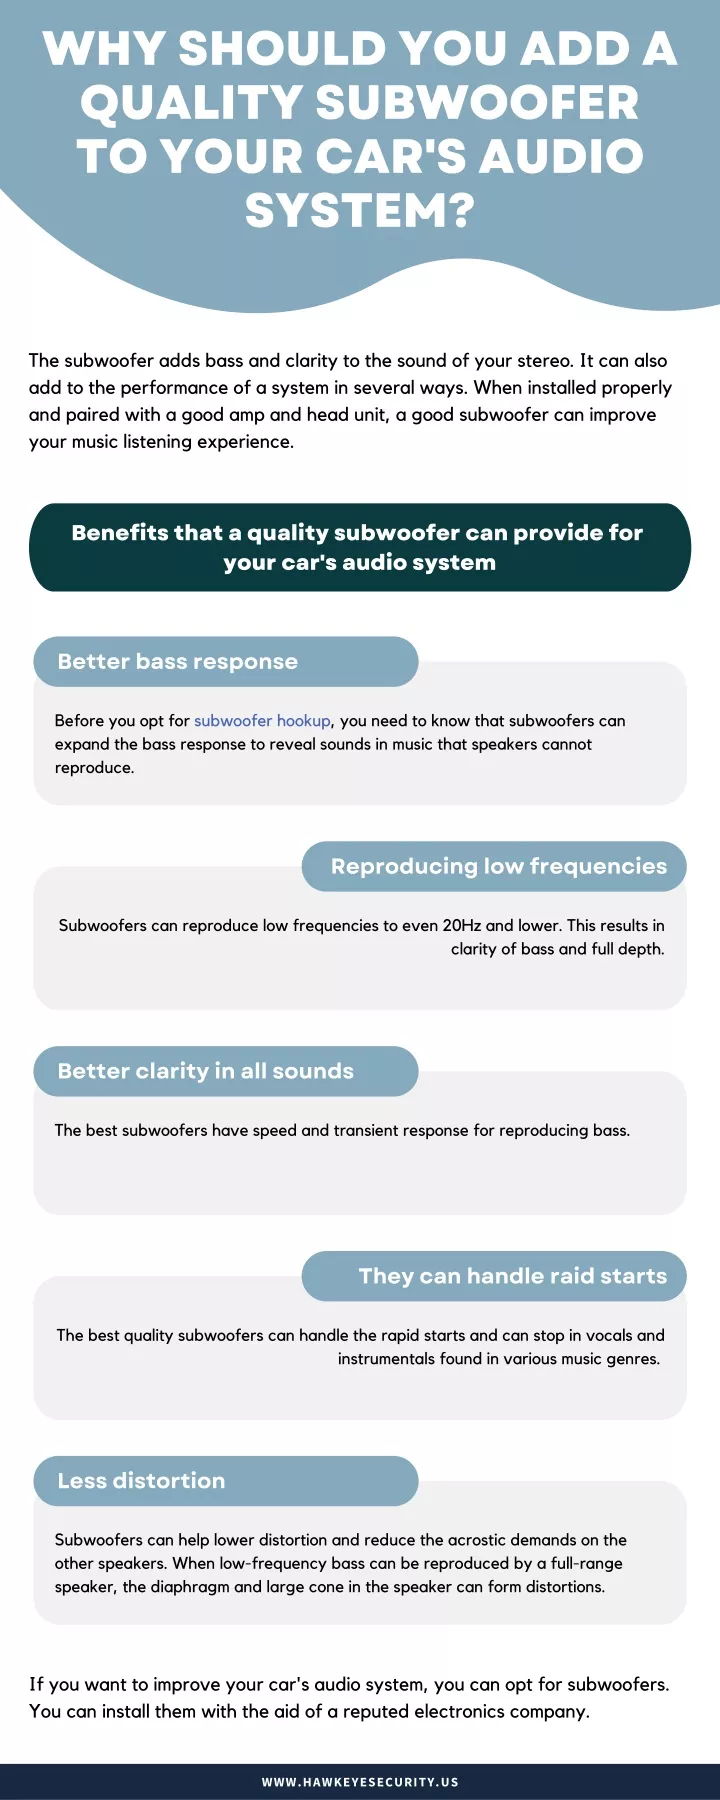 why should you add a quality subwoofer to your